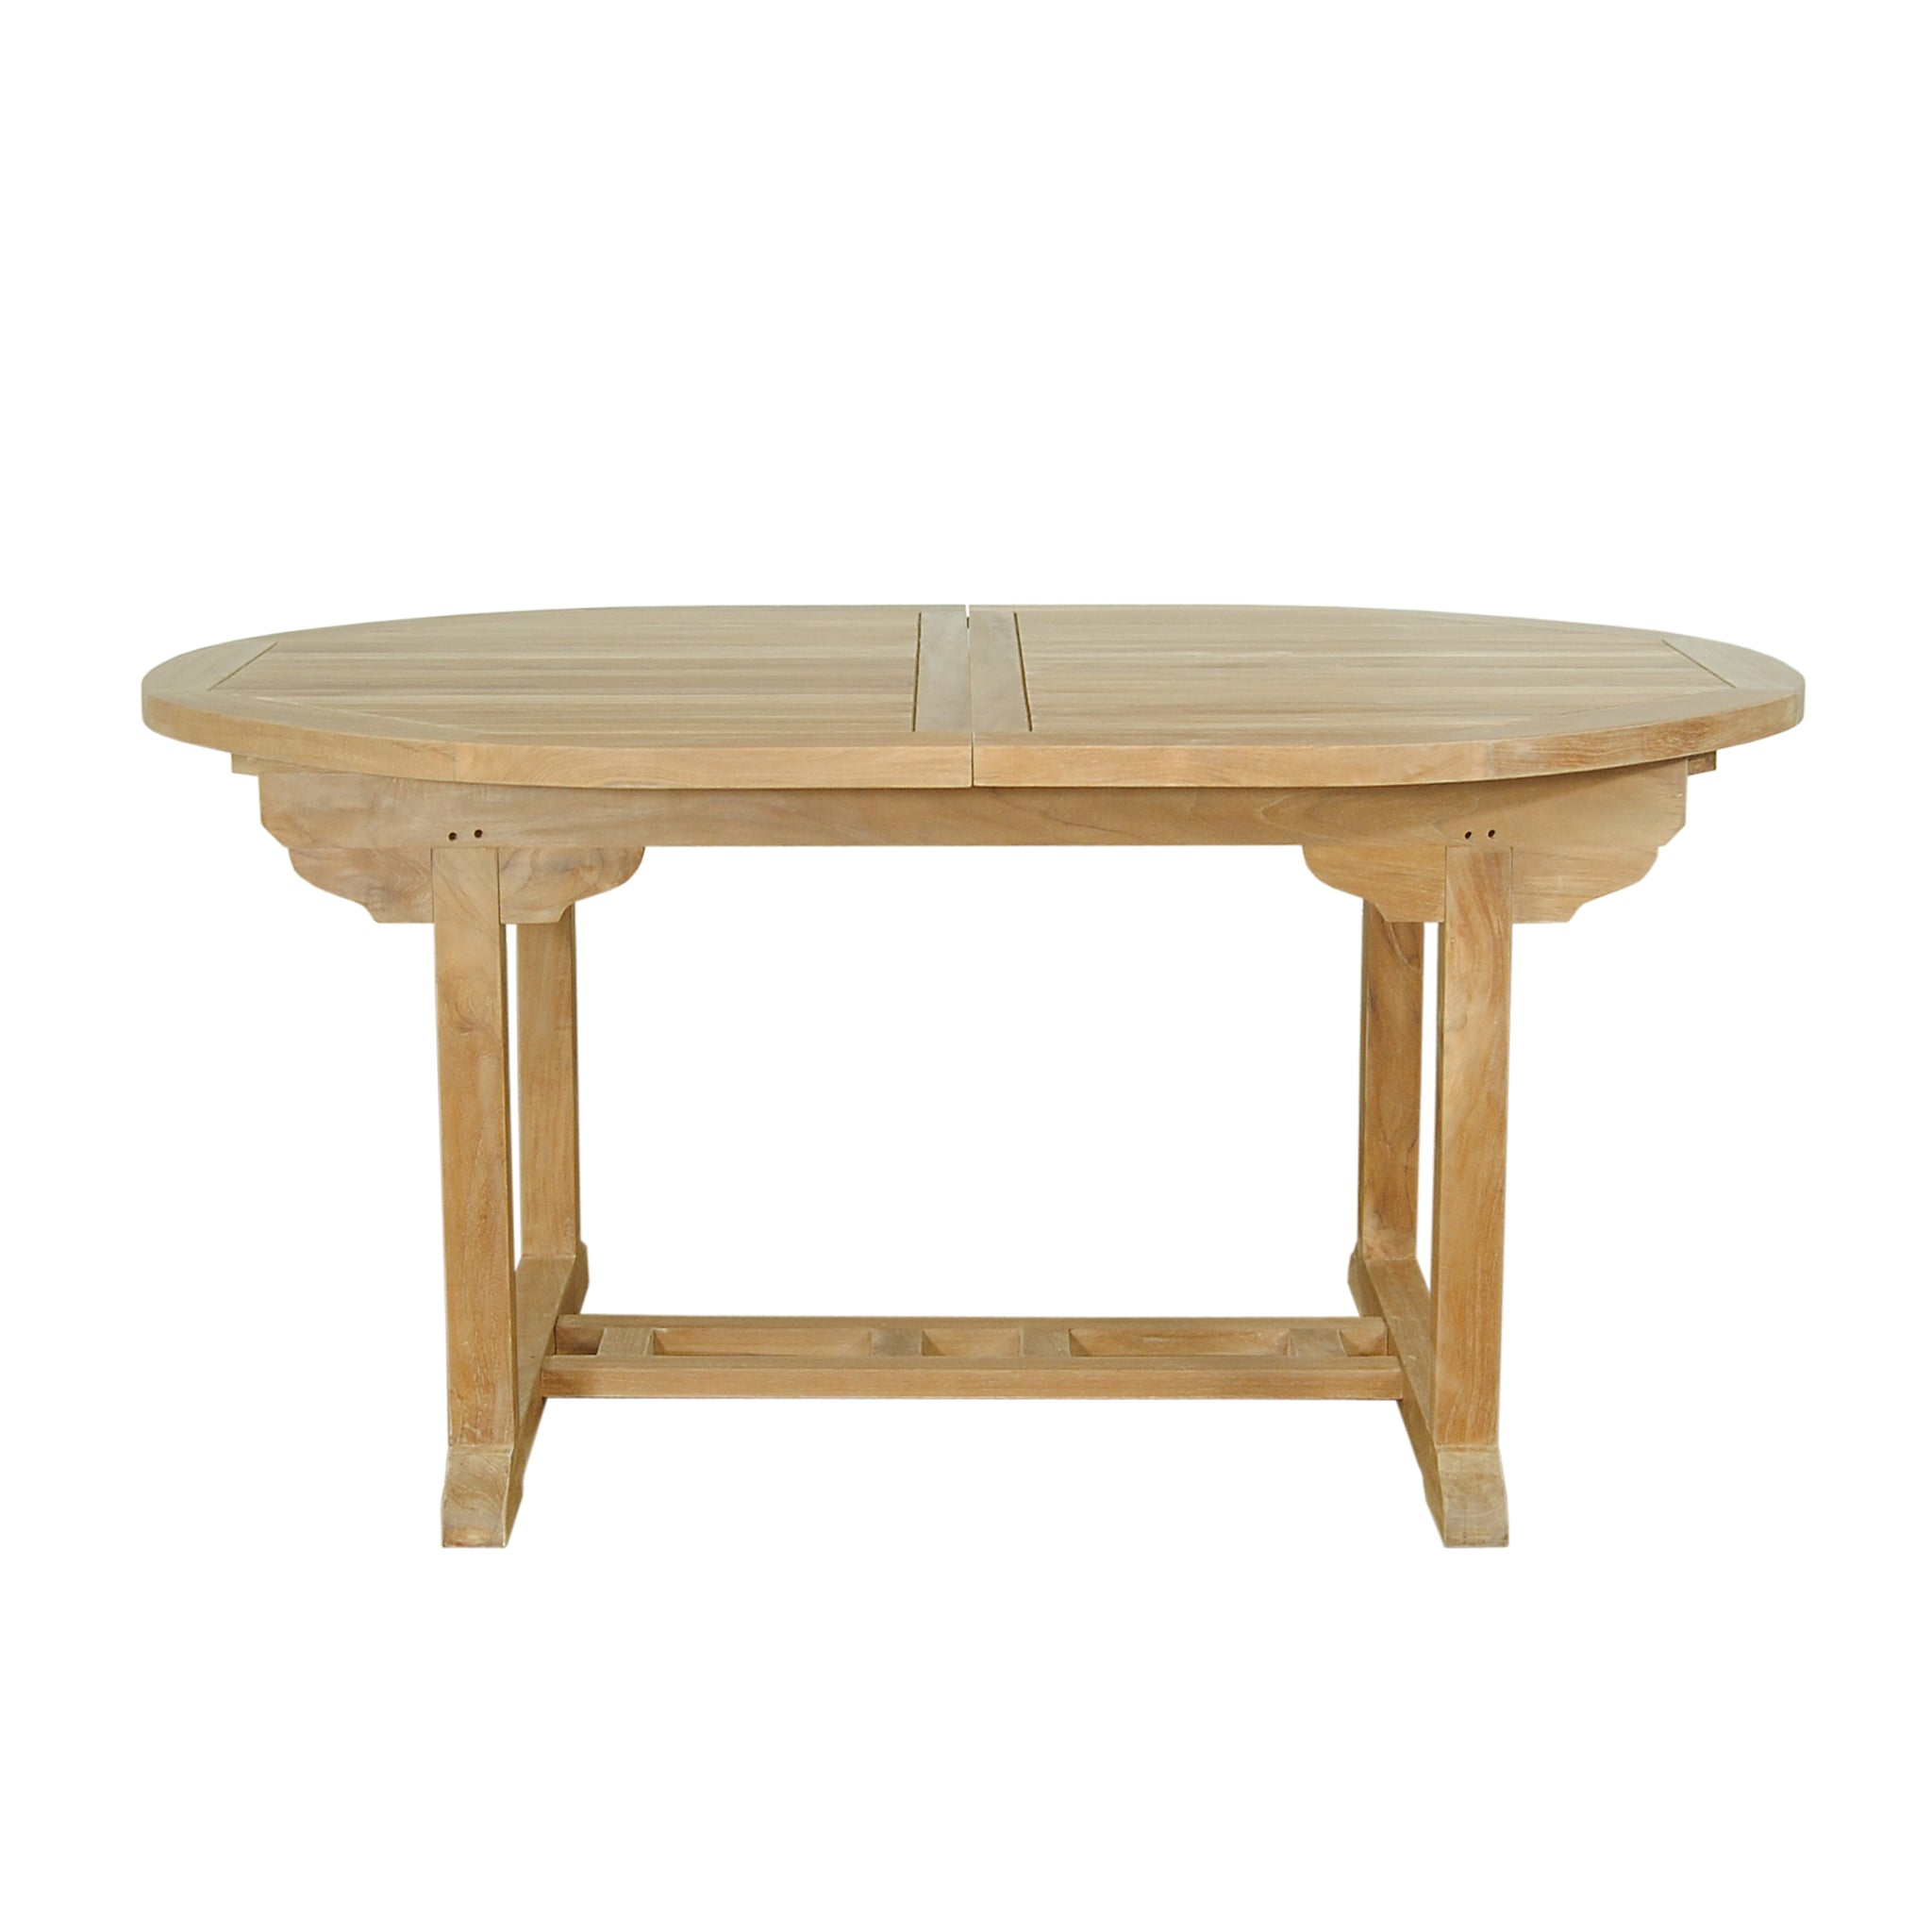 Anderson Teak Bahama 87" Oval Extension Table Extra Thick Wood TBX-087VT